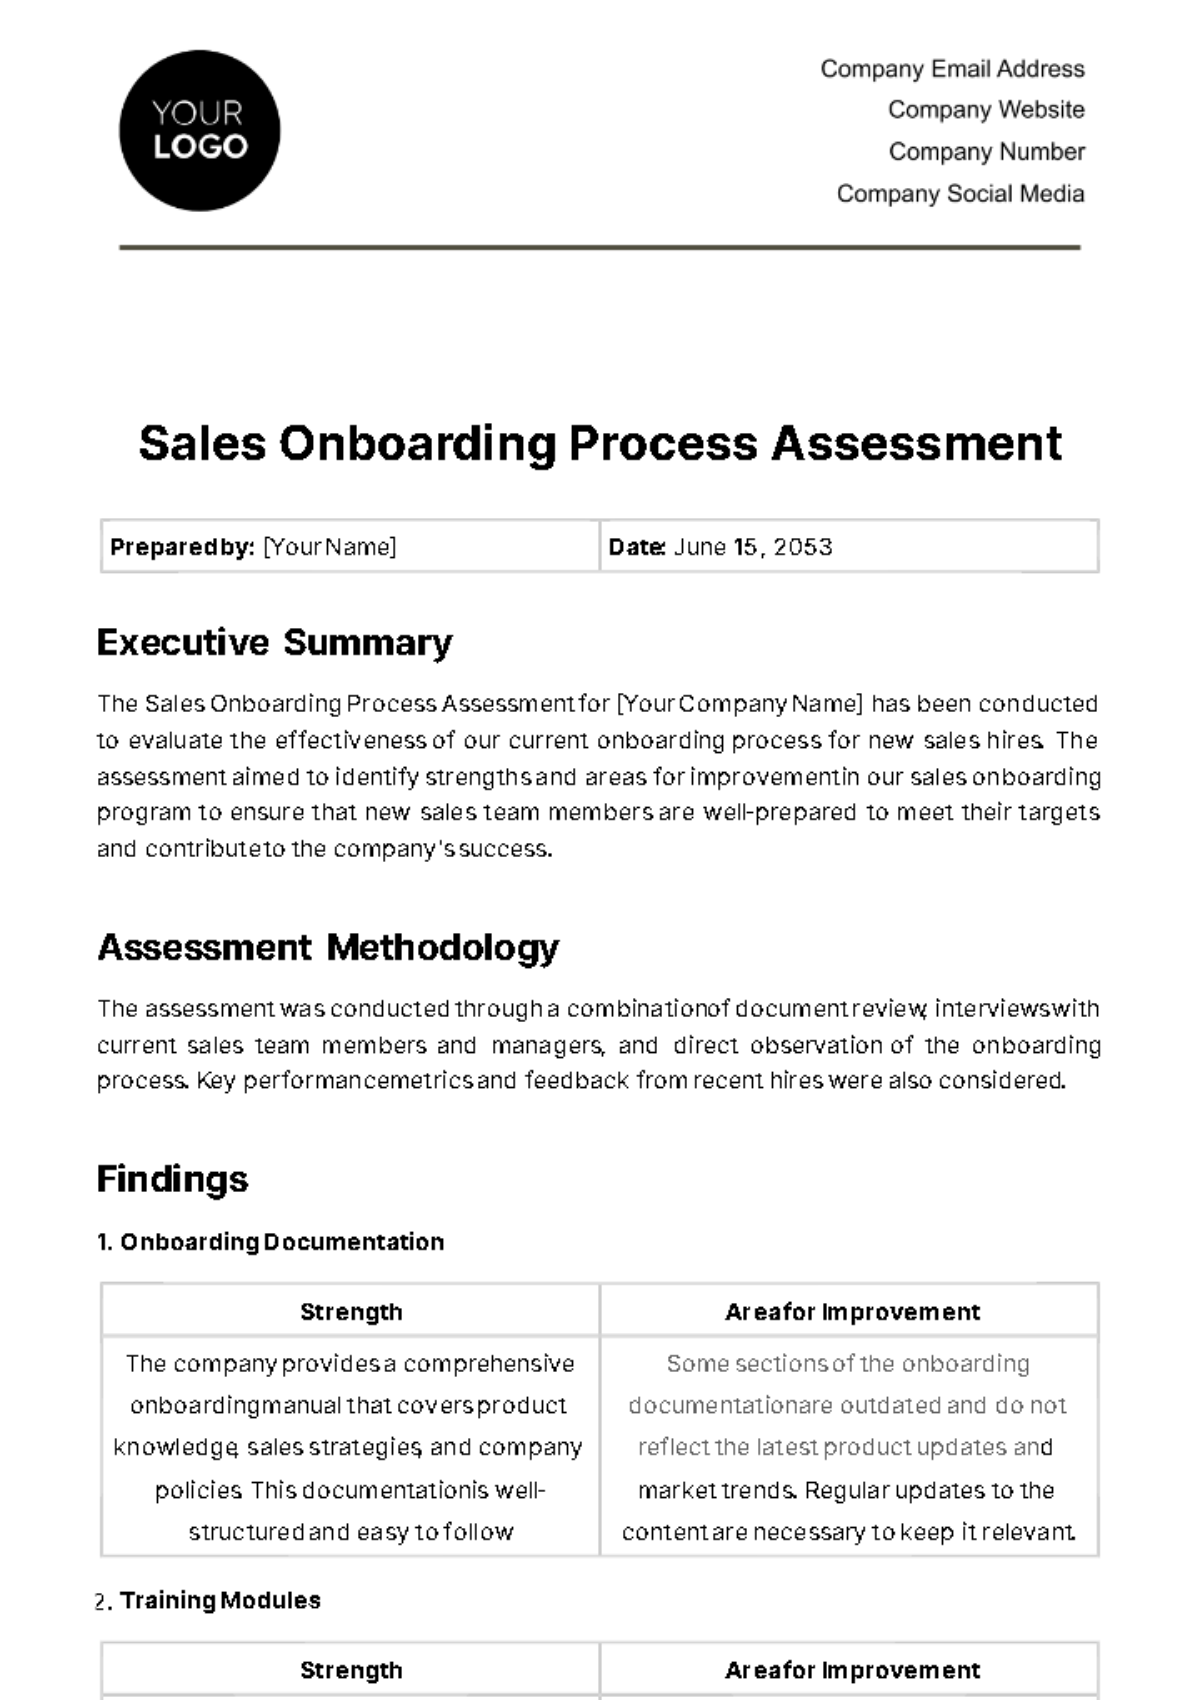 Sales Onboarding Process Assessment Template